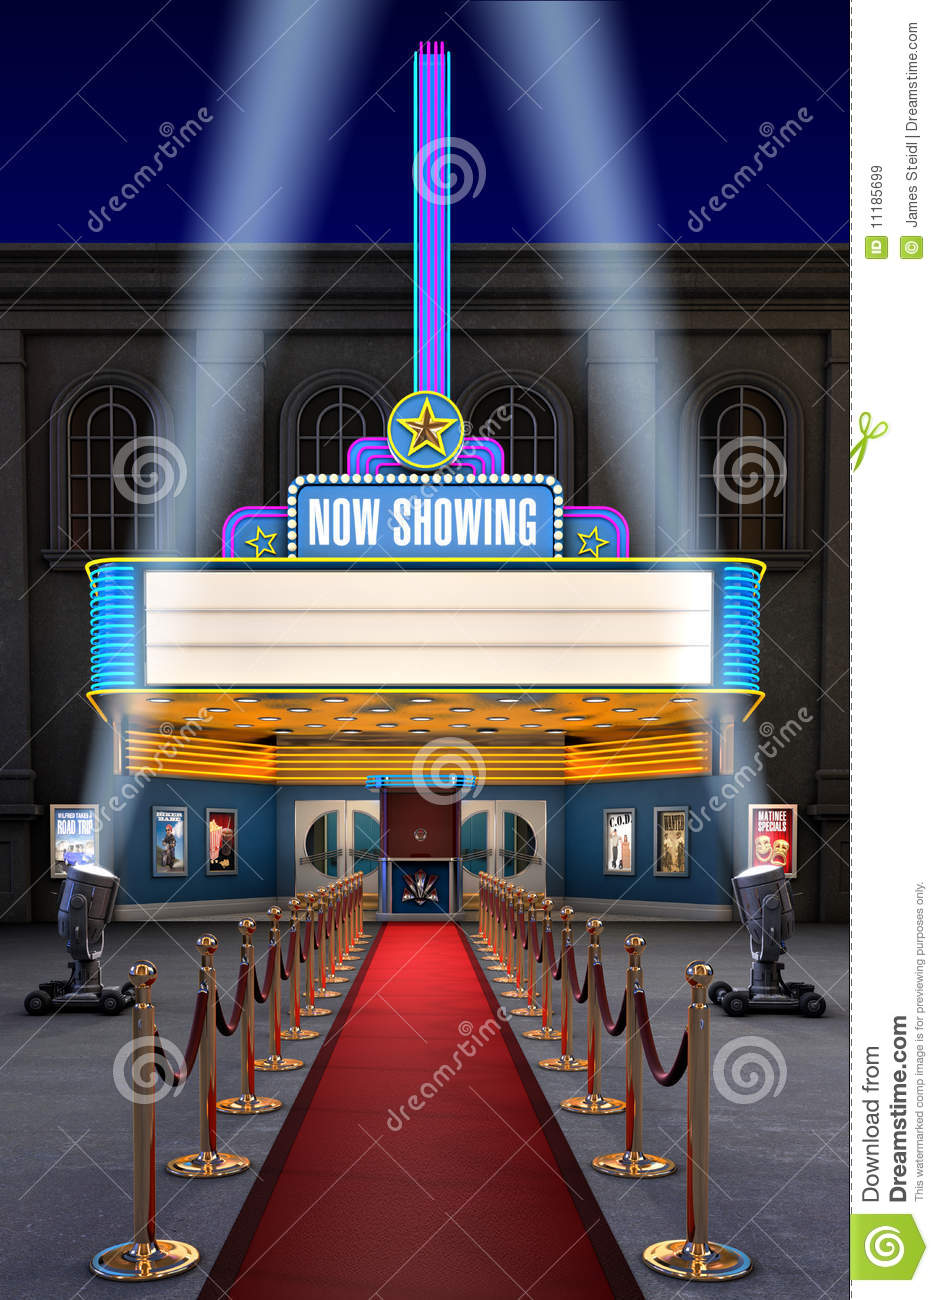 Movie Theatre   Ticket Box Royalty Free Stock Images   Image  11185699